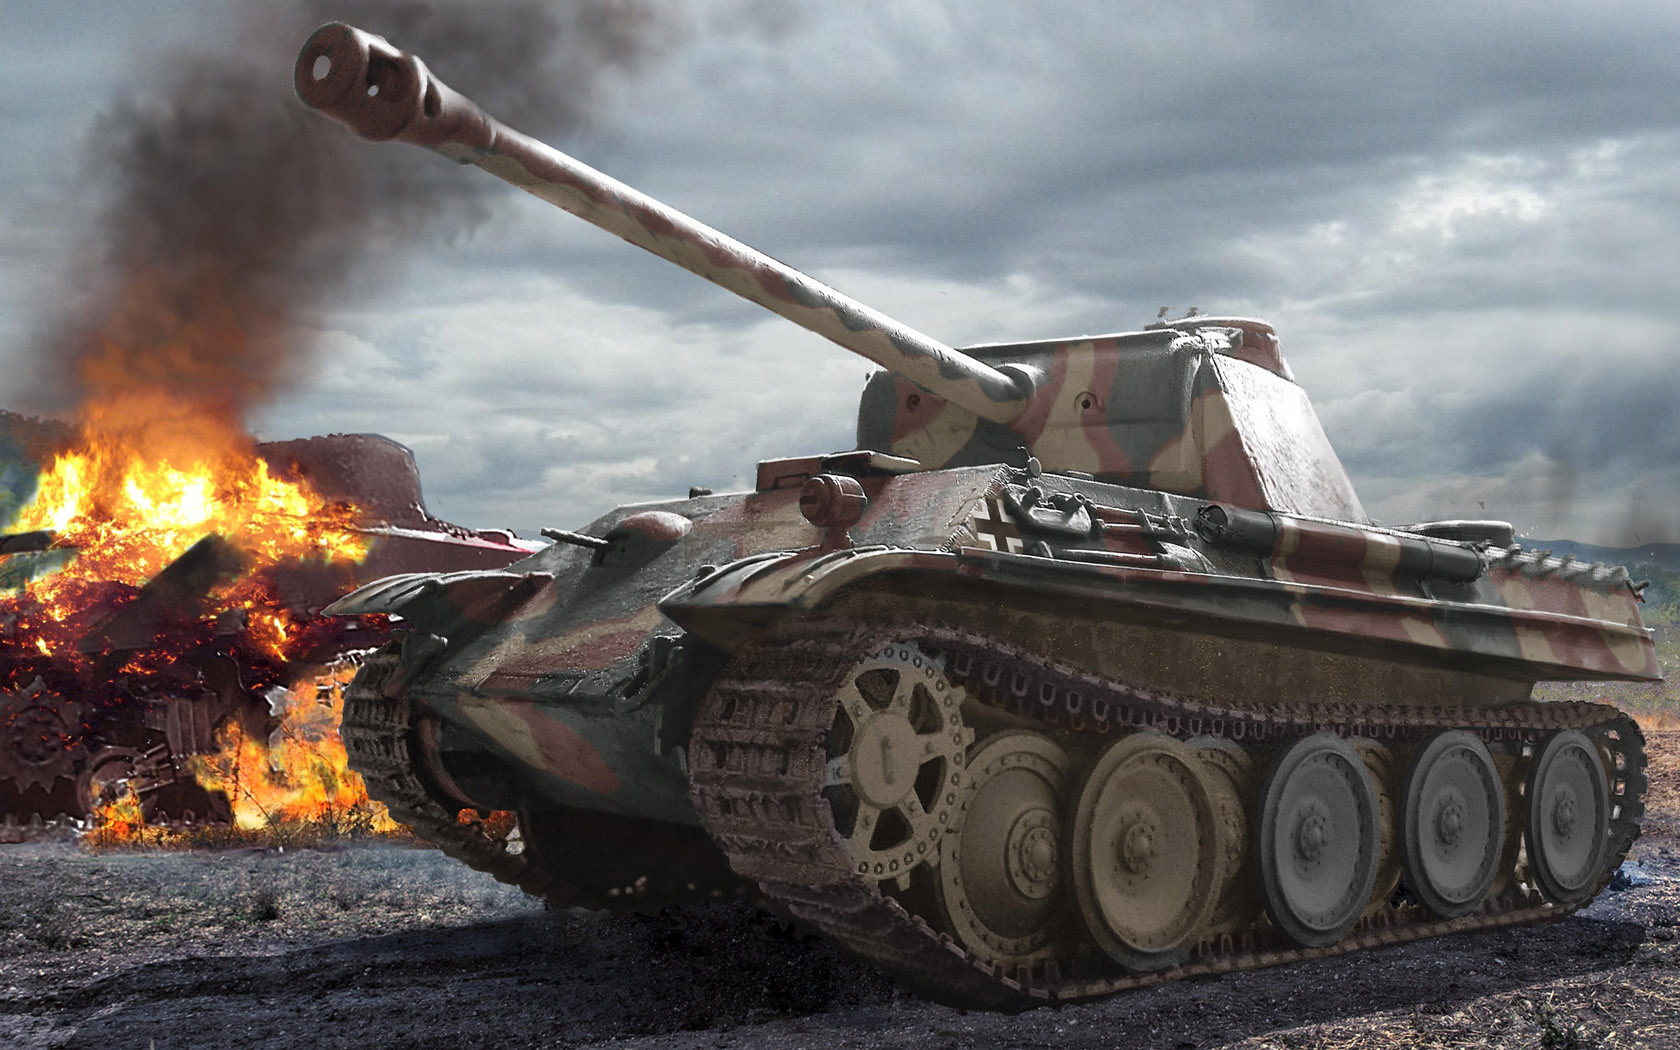 General 1680x1050 tank fire army military military vehicle artwork smoke sky clouds Panther tank